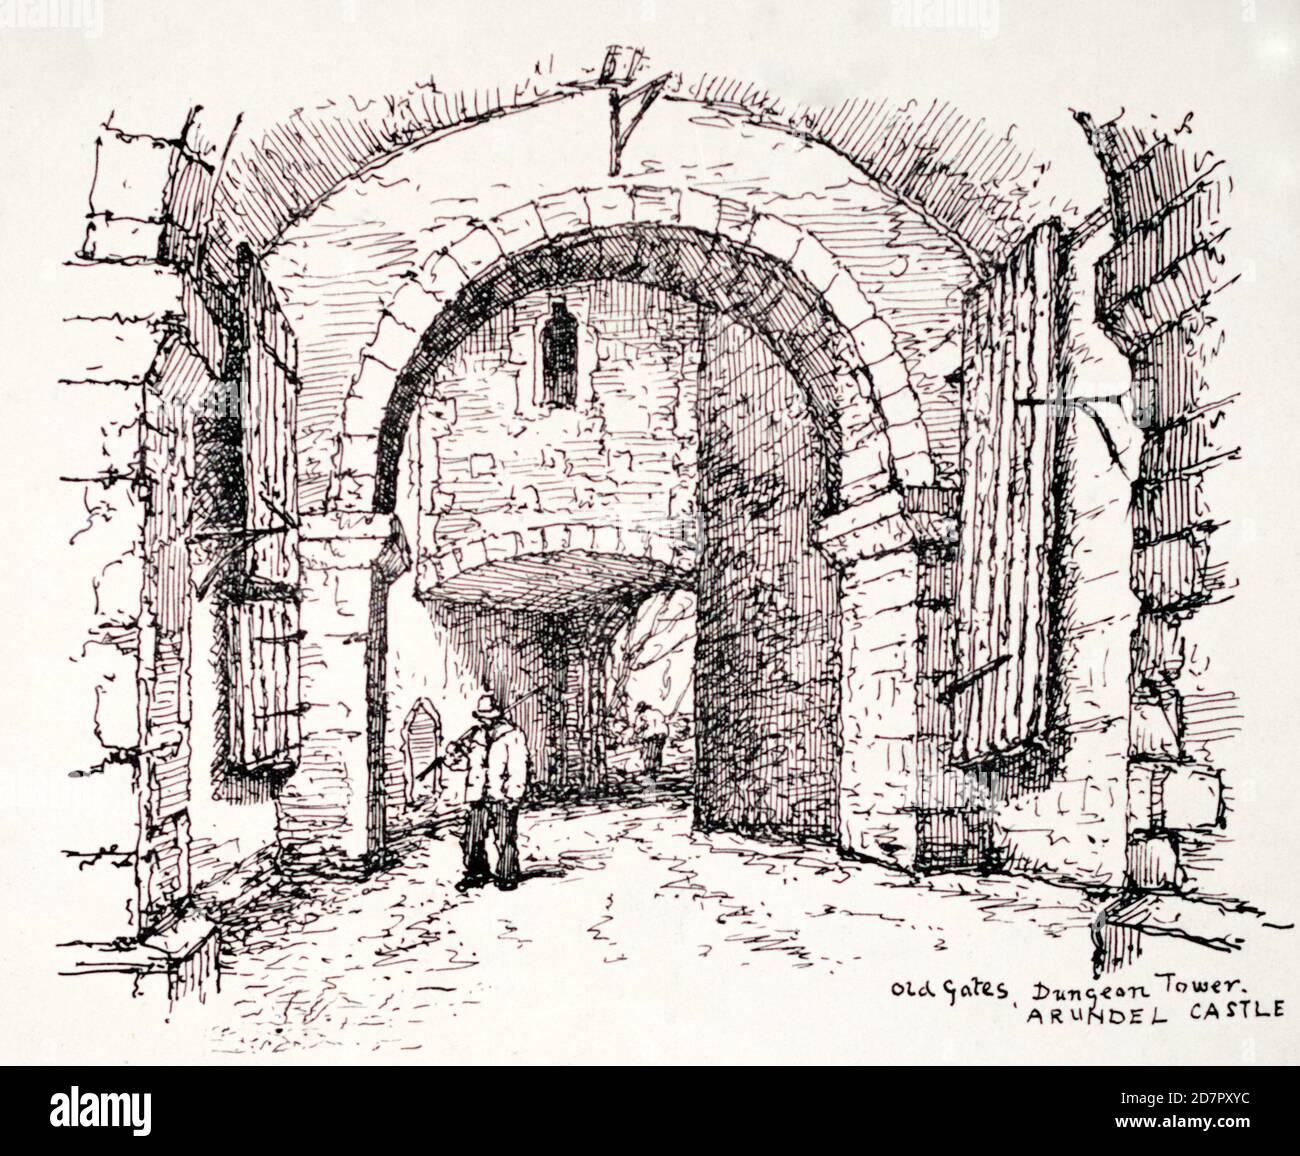 A historical sketch of the old gates of the Dungeon Tower, Arundel Castle,  Sussex, England, UK, by the renowned Victorian artist R. H. Nibbs taken  from his 1874 collection of works -